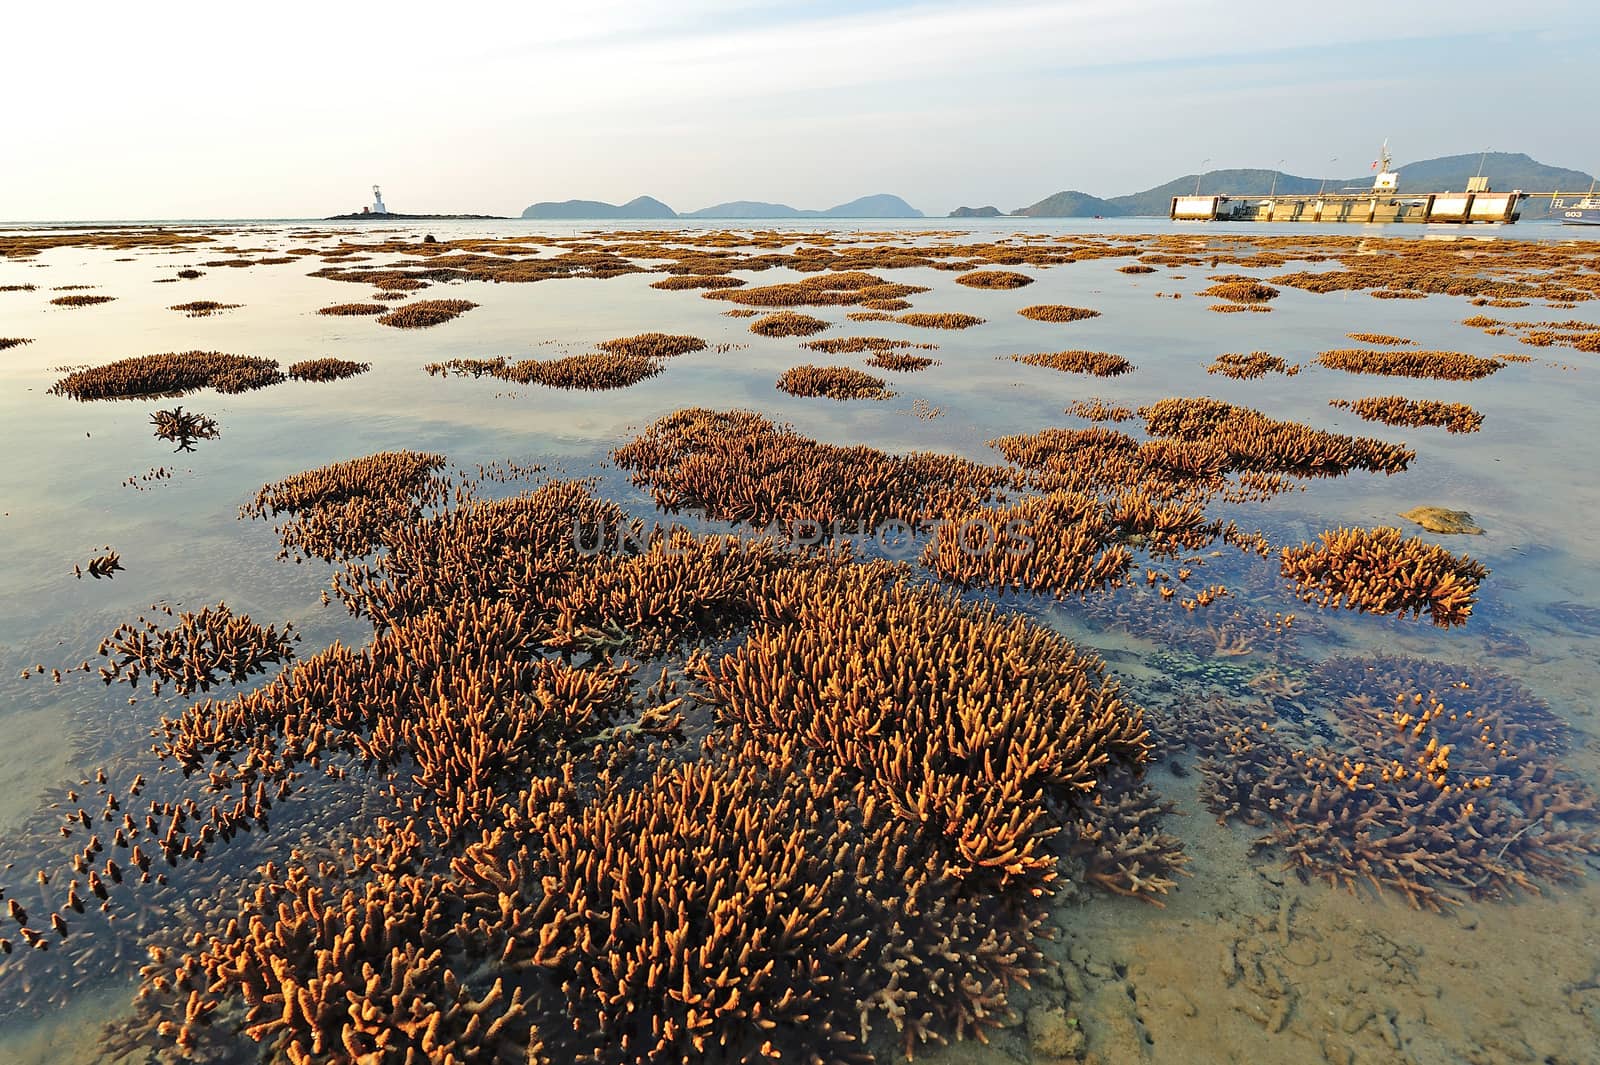 Corals in shallow waters on the coast of Phuket, Thailand by think4photop